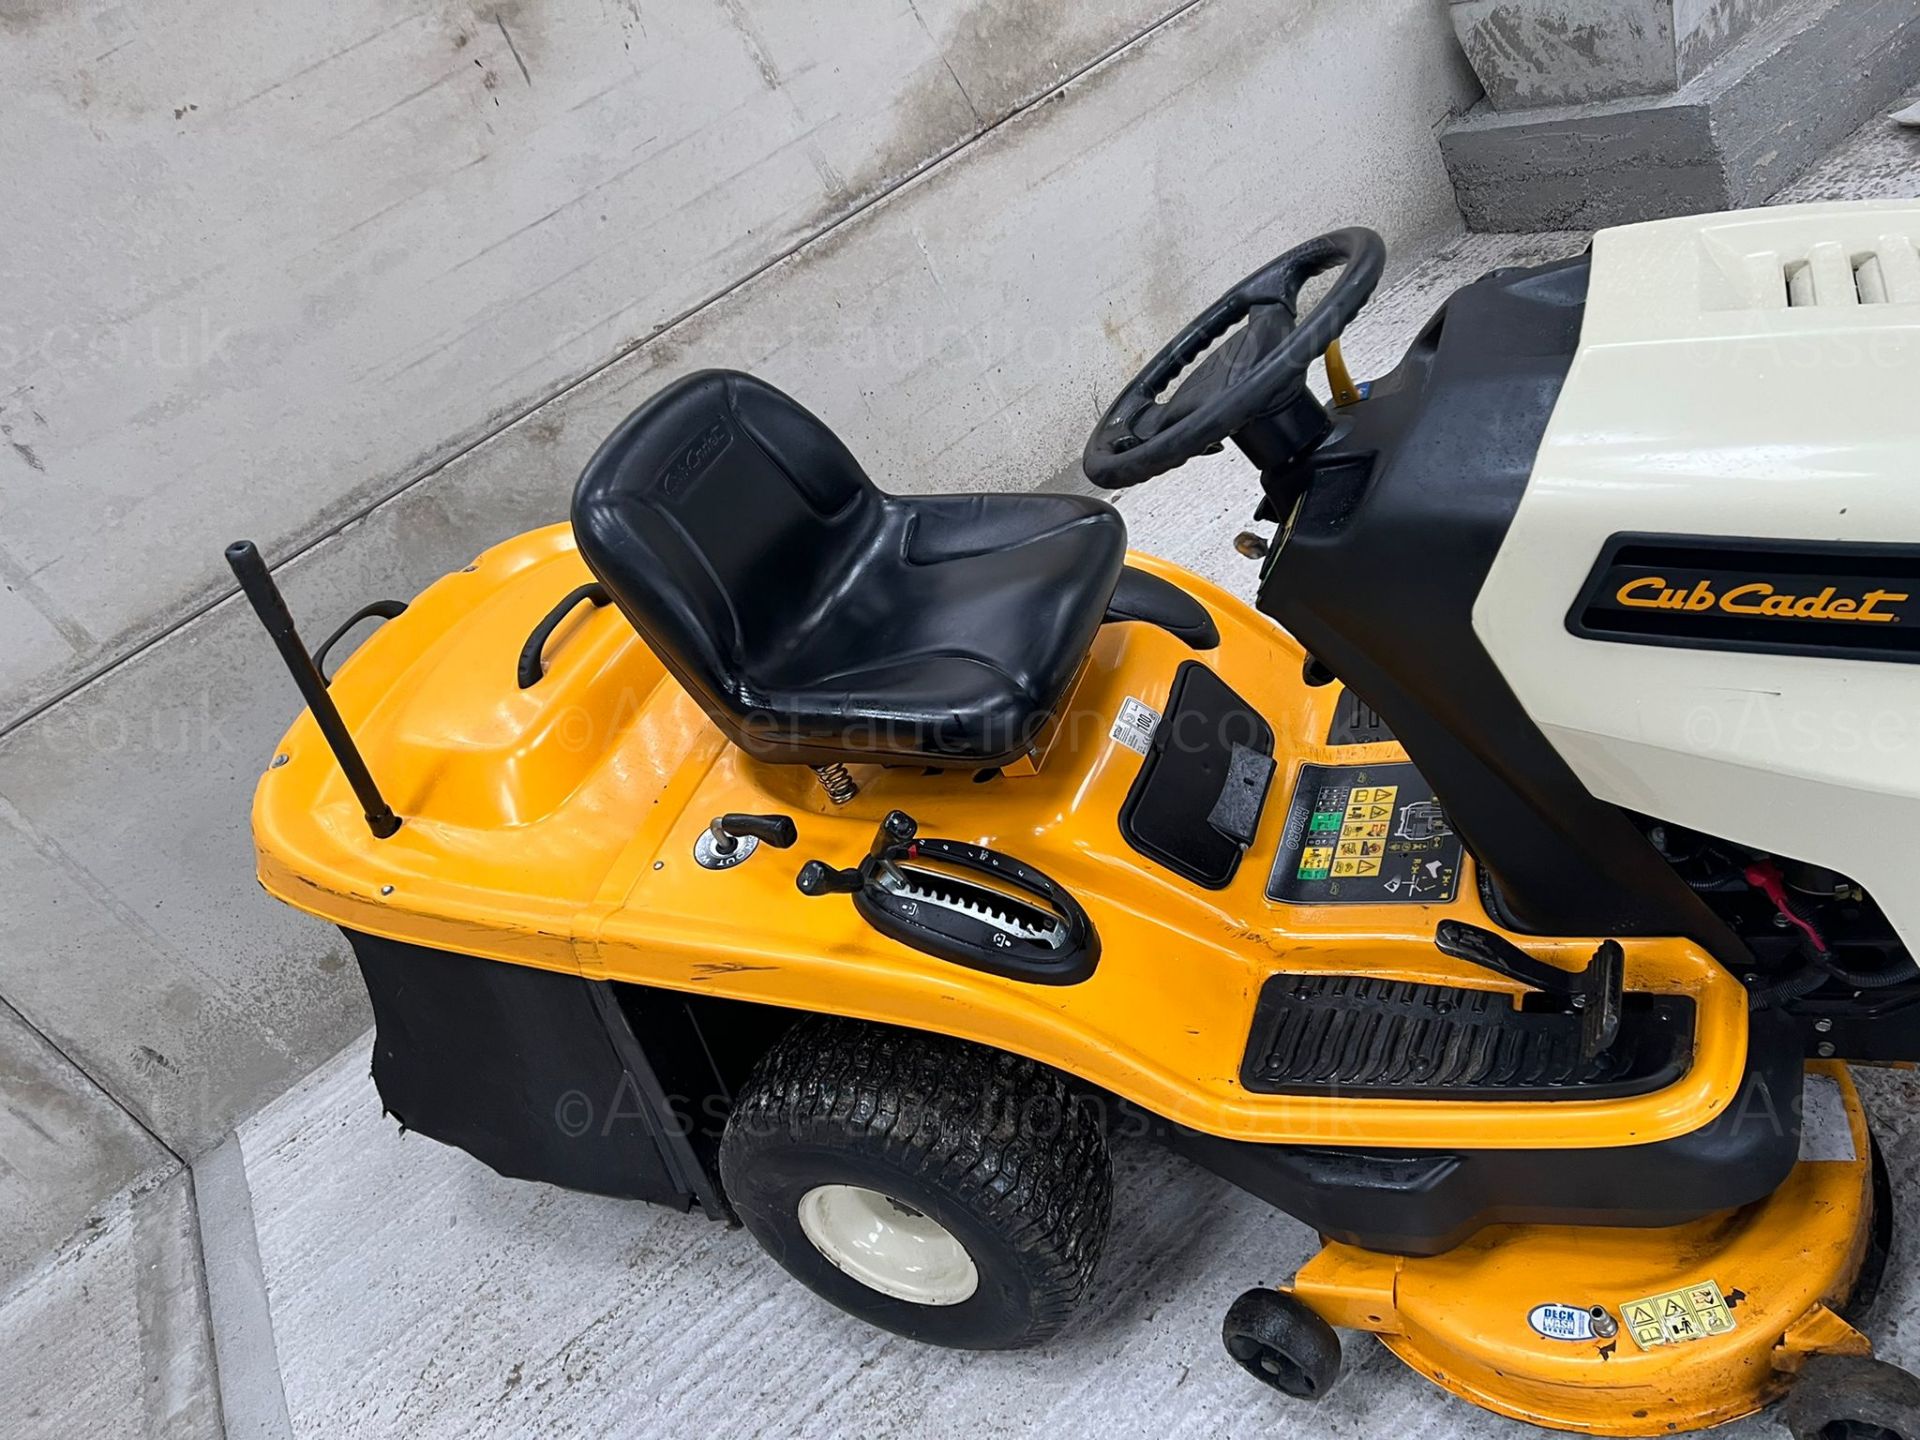 2015 CUB CADET 1020 RIDE ON LAWN MOWER, RUNS WORKS AND CUTS WELL, ONLY 250 HOURS FROM NEW *NO VAT* - Image 5 of 6